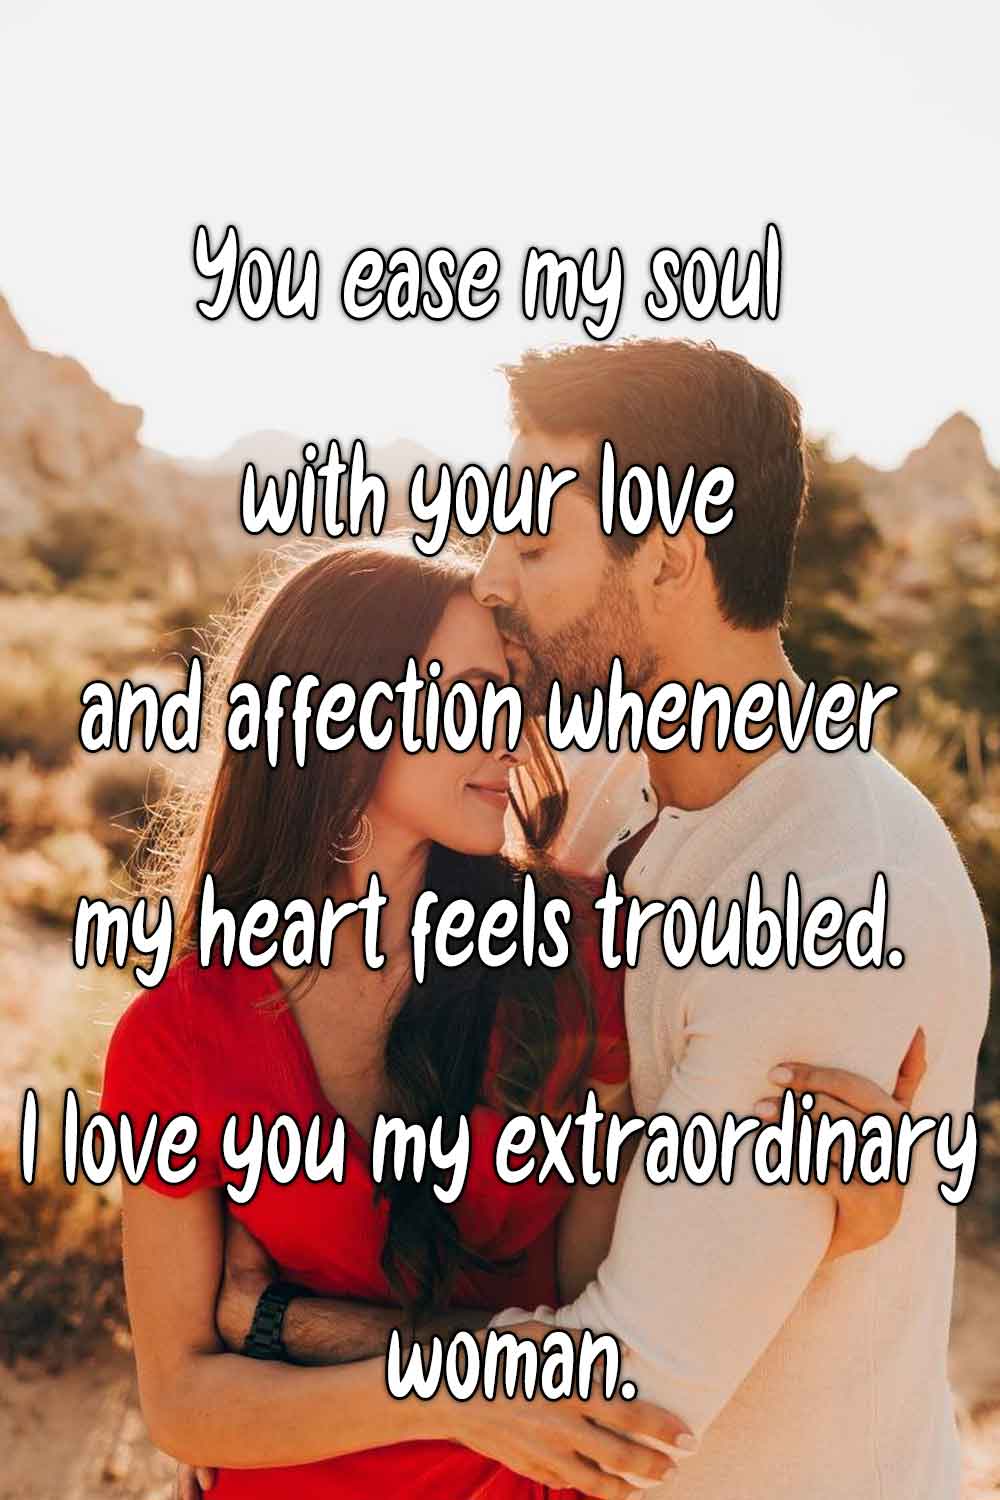 You ease my soul with your love and affection whenever my heart feels troubled. I love you my extraordinary woman.